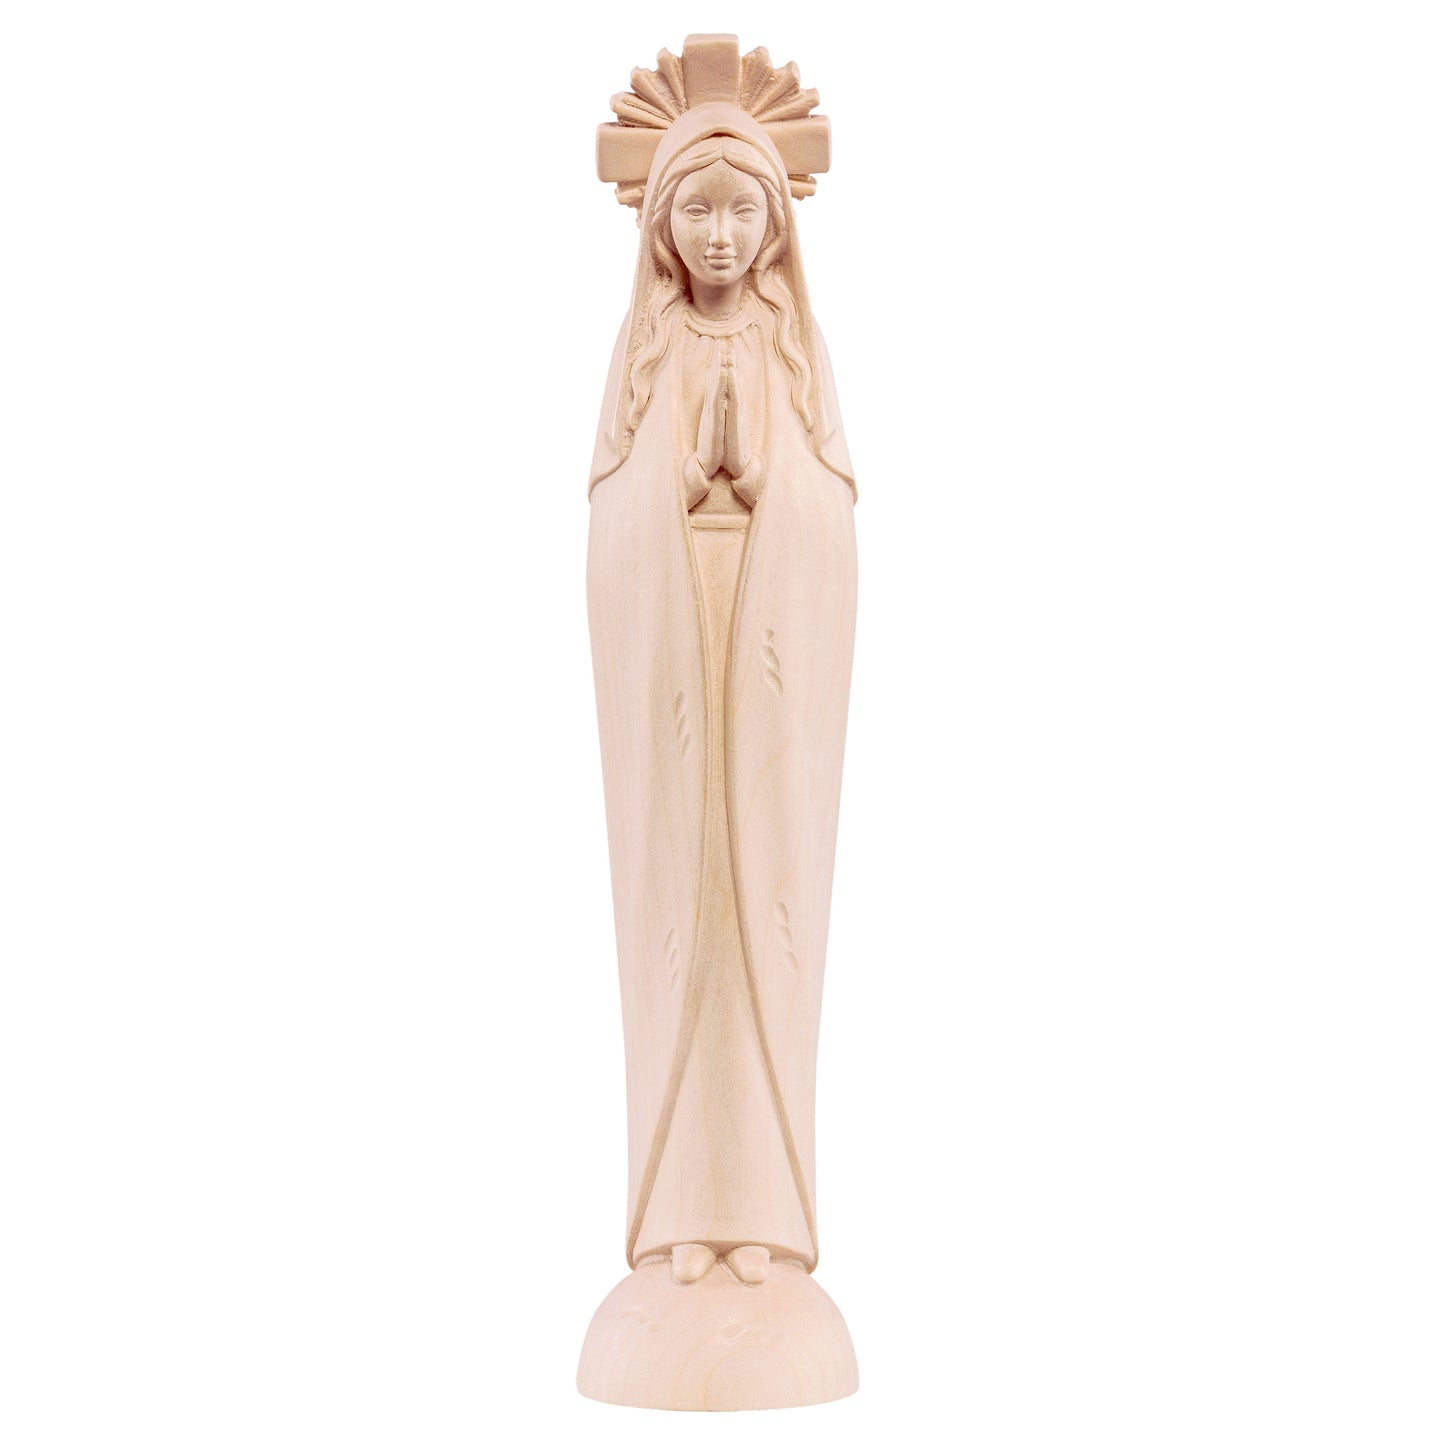 MONDO CATTOLICO Natural / 20 cm (7.9 in) Wooden statue of Madonna stylized